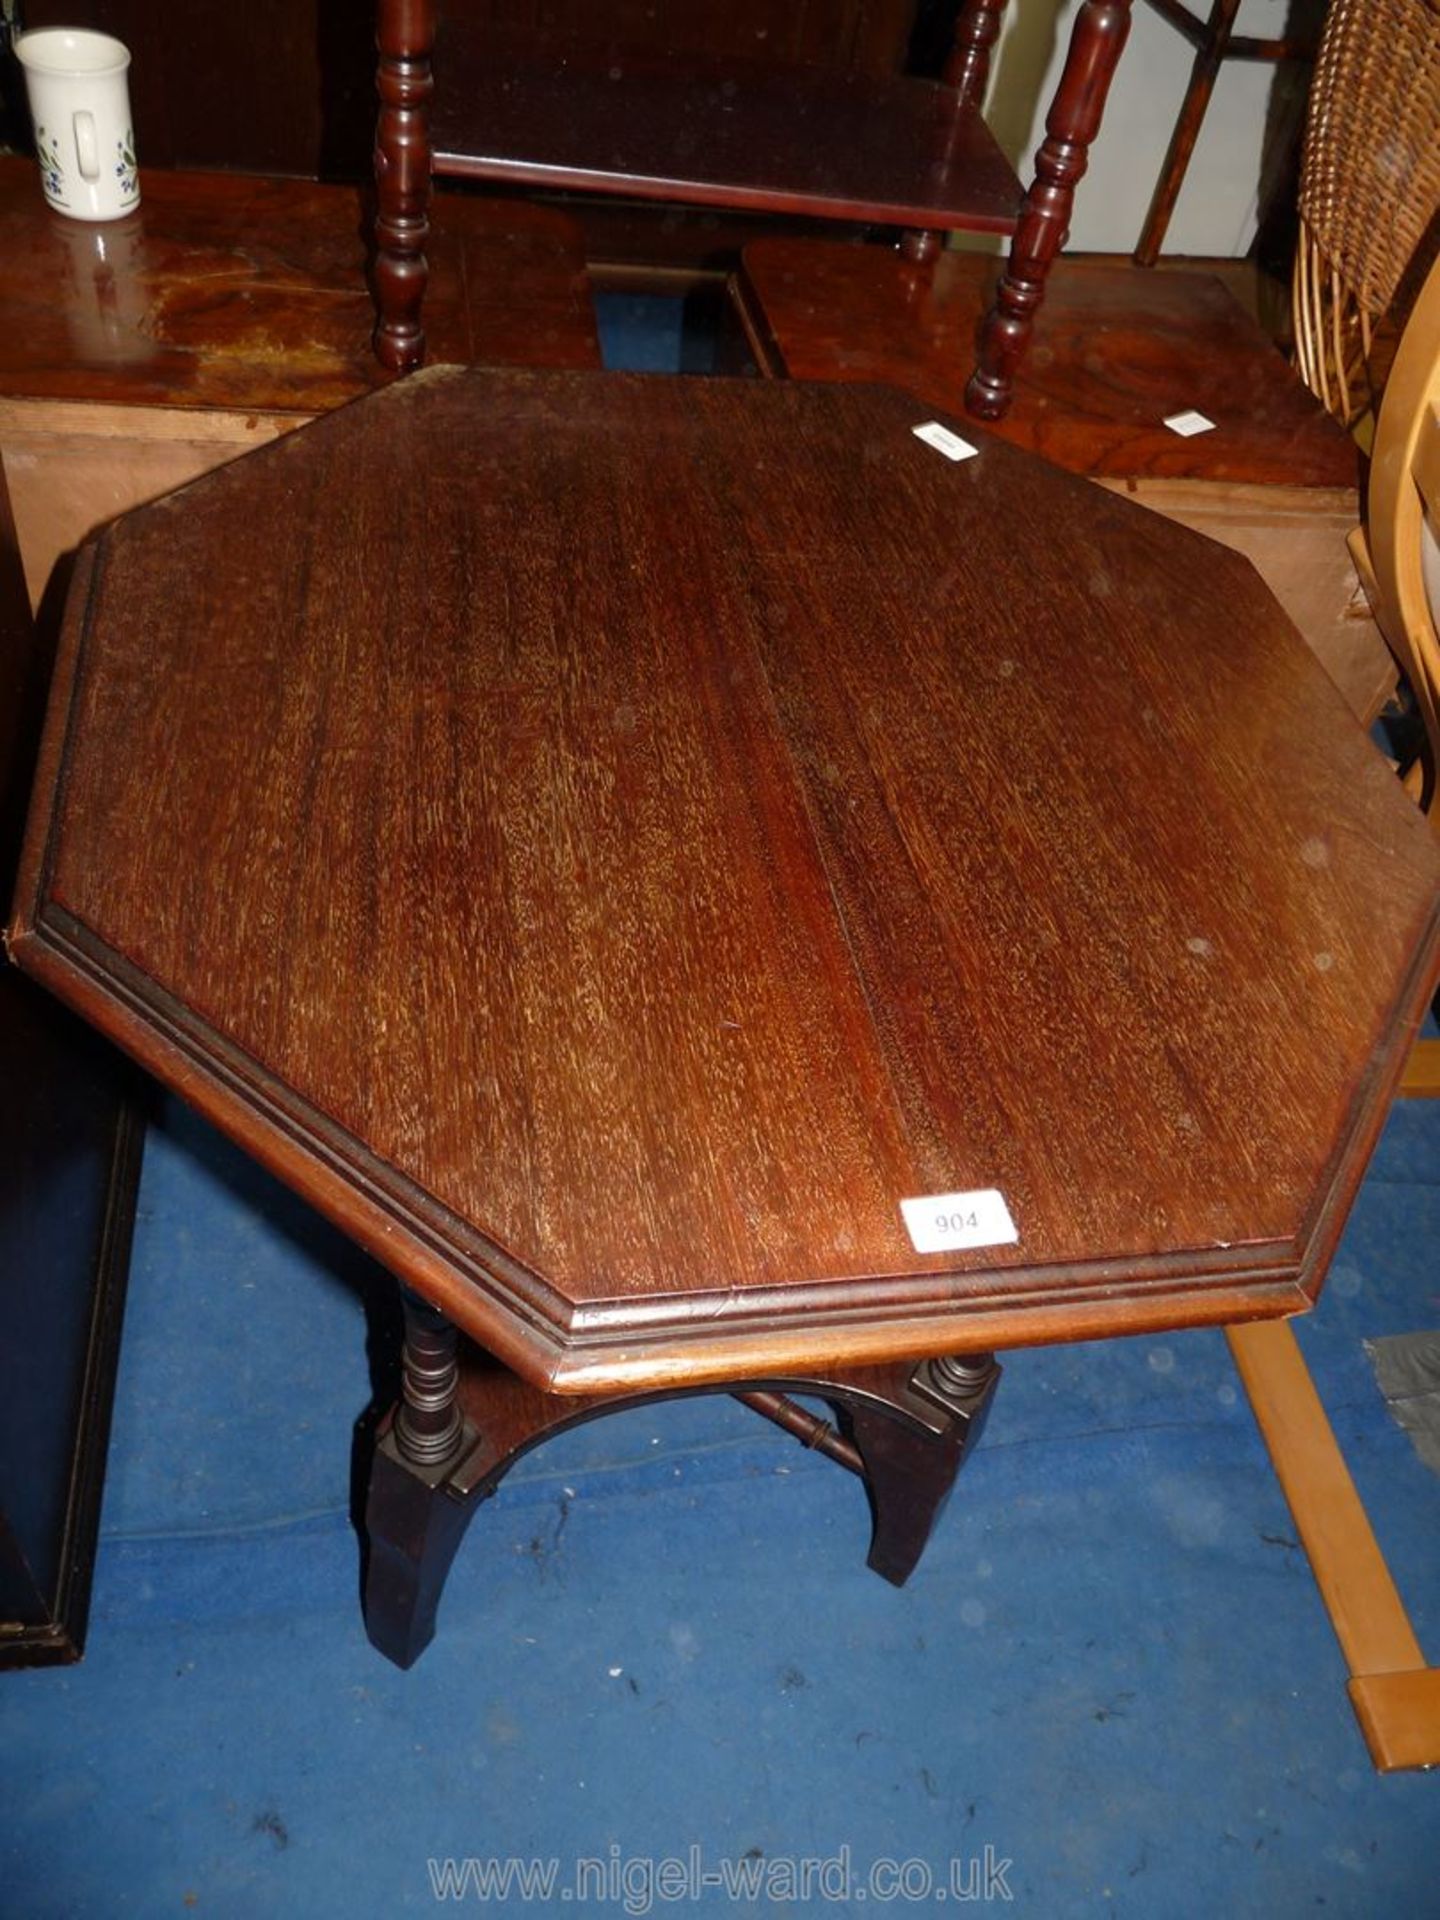 An octagonal topped occasional table with lower shelf, 25 1/2" x 25 1/2" x 27 1/2" high.